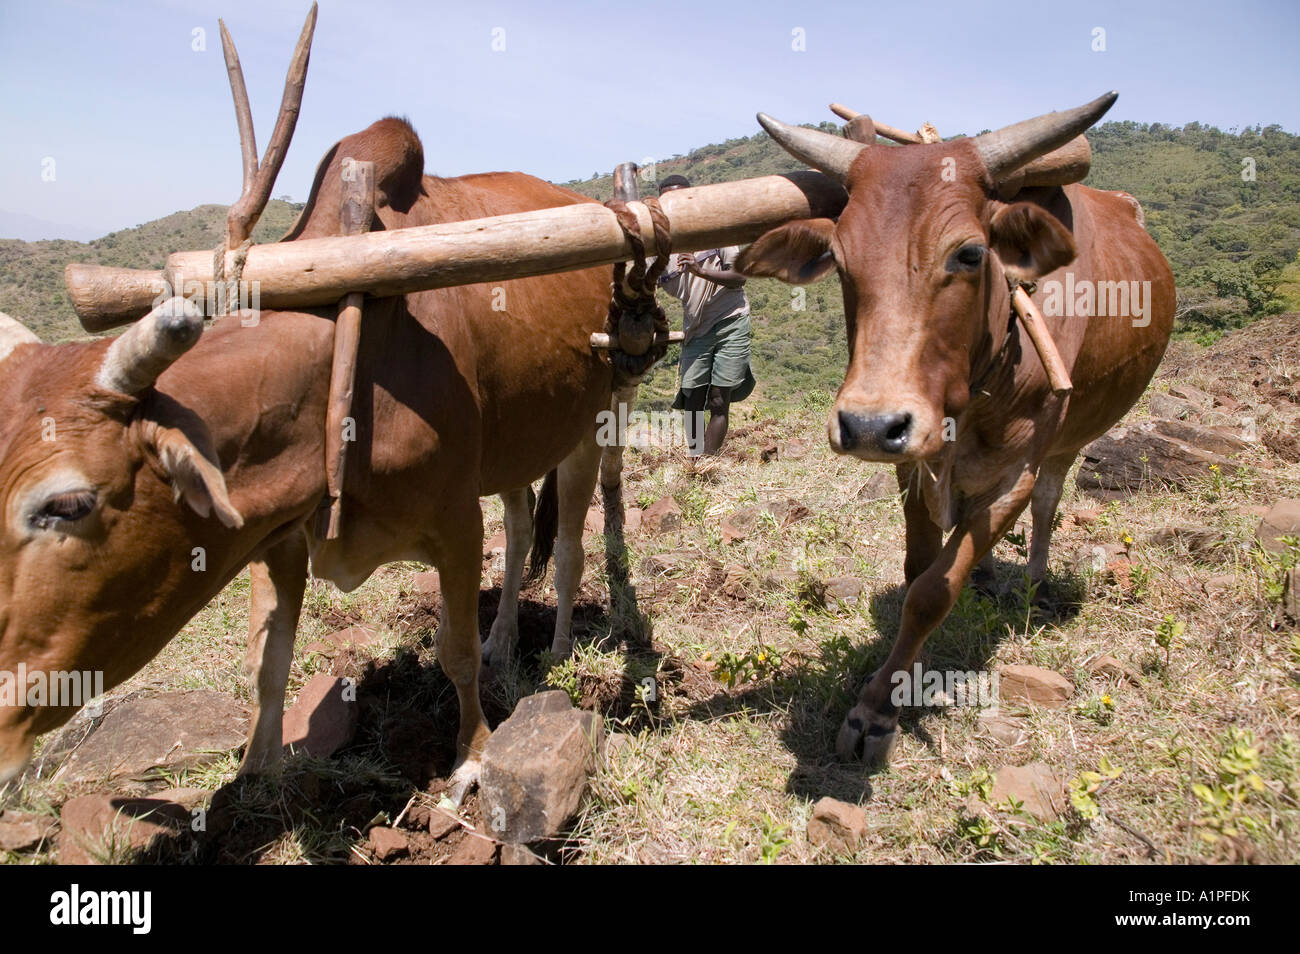 Animals are used to help plow the earth getting it ready for the next planting season in rural Ethiopia Stock Photo